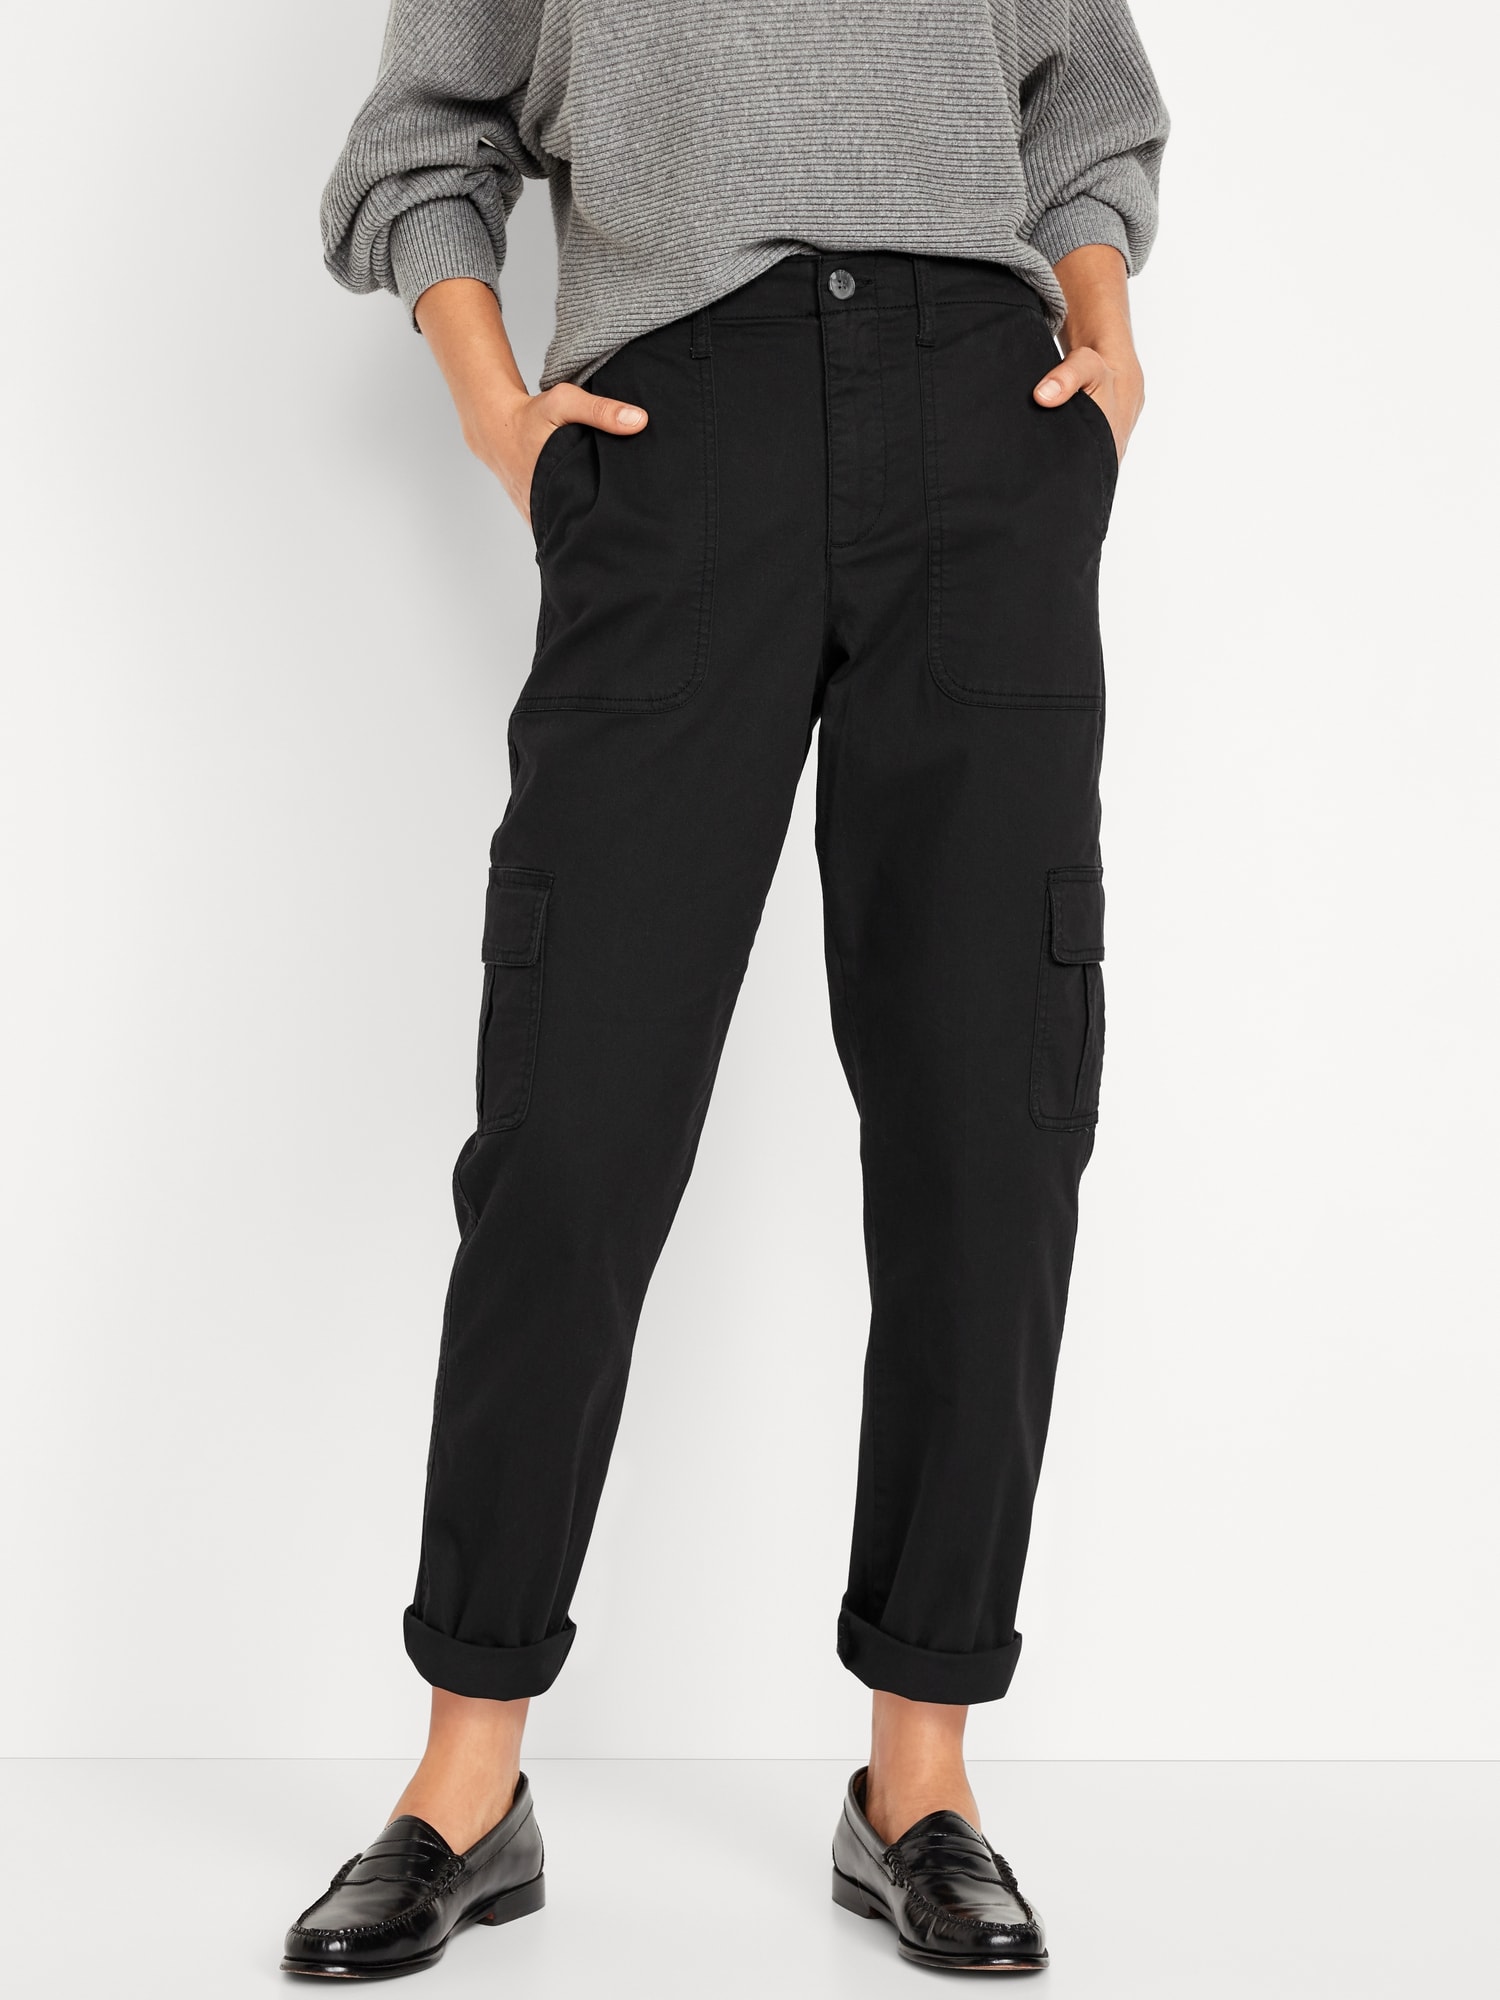 Old Navy High-Waisted OGC Chino Cargo Pants for Women